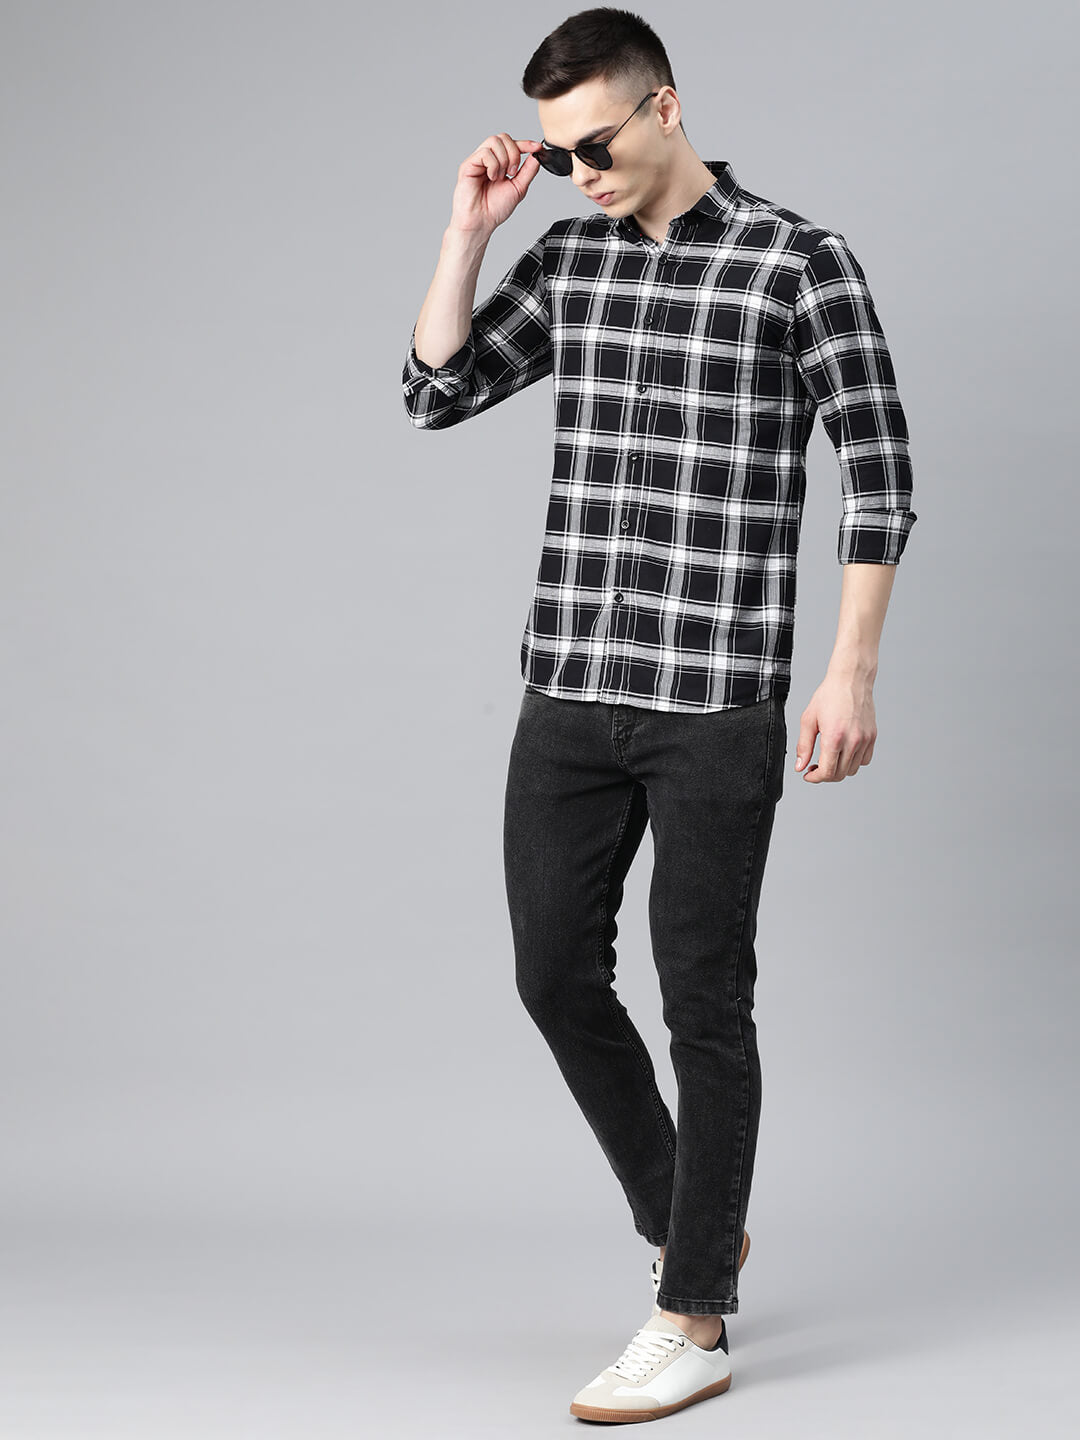 5thanfold Men's Casual Pure Cotton Full Sleeve Checkered Black Slim Fit Shirt